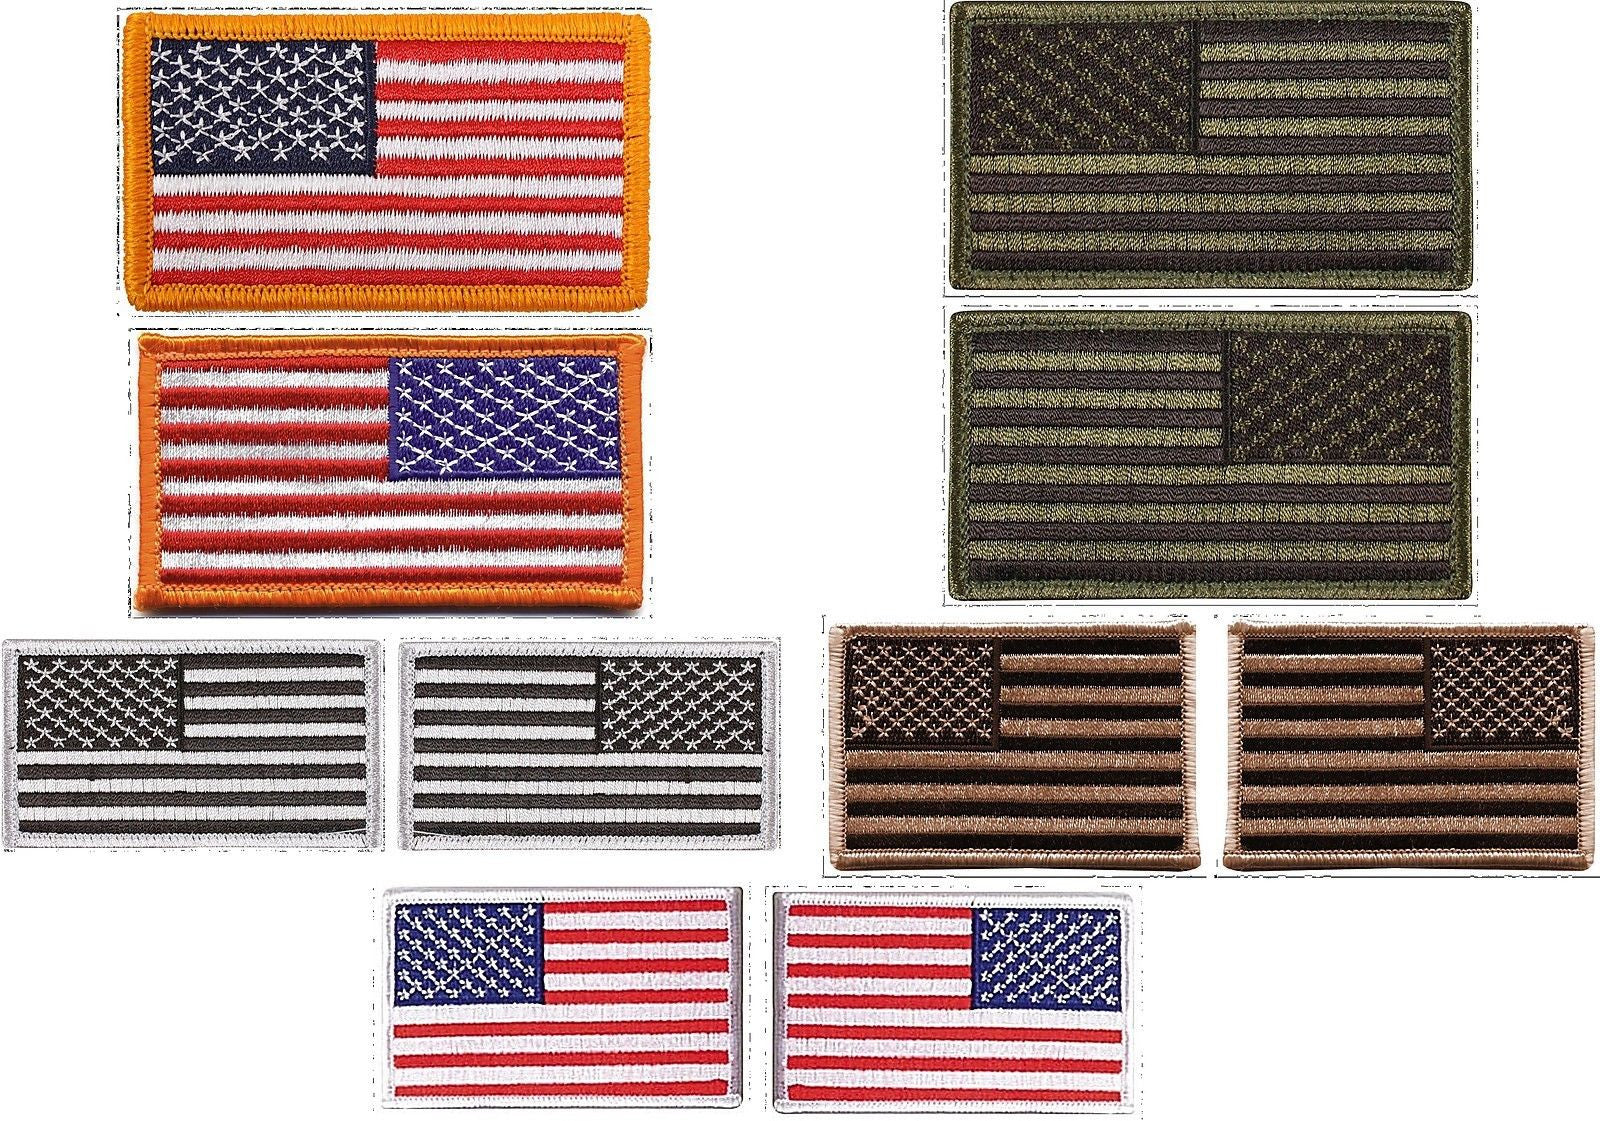 Pack of 3 American Flag Patches, US Embroidered Iron or Sew On